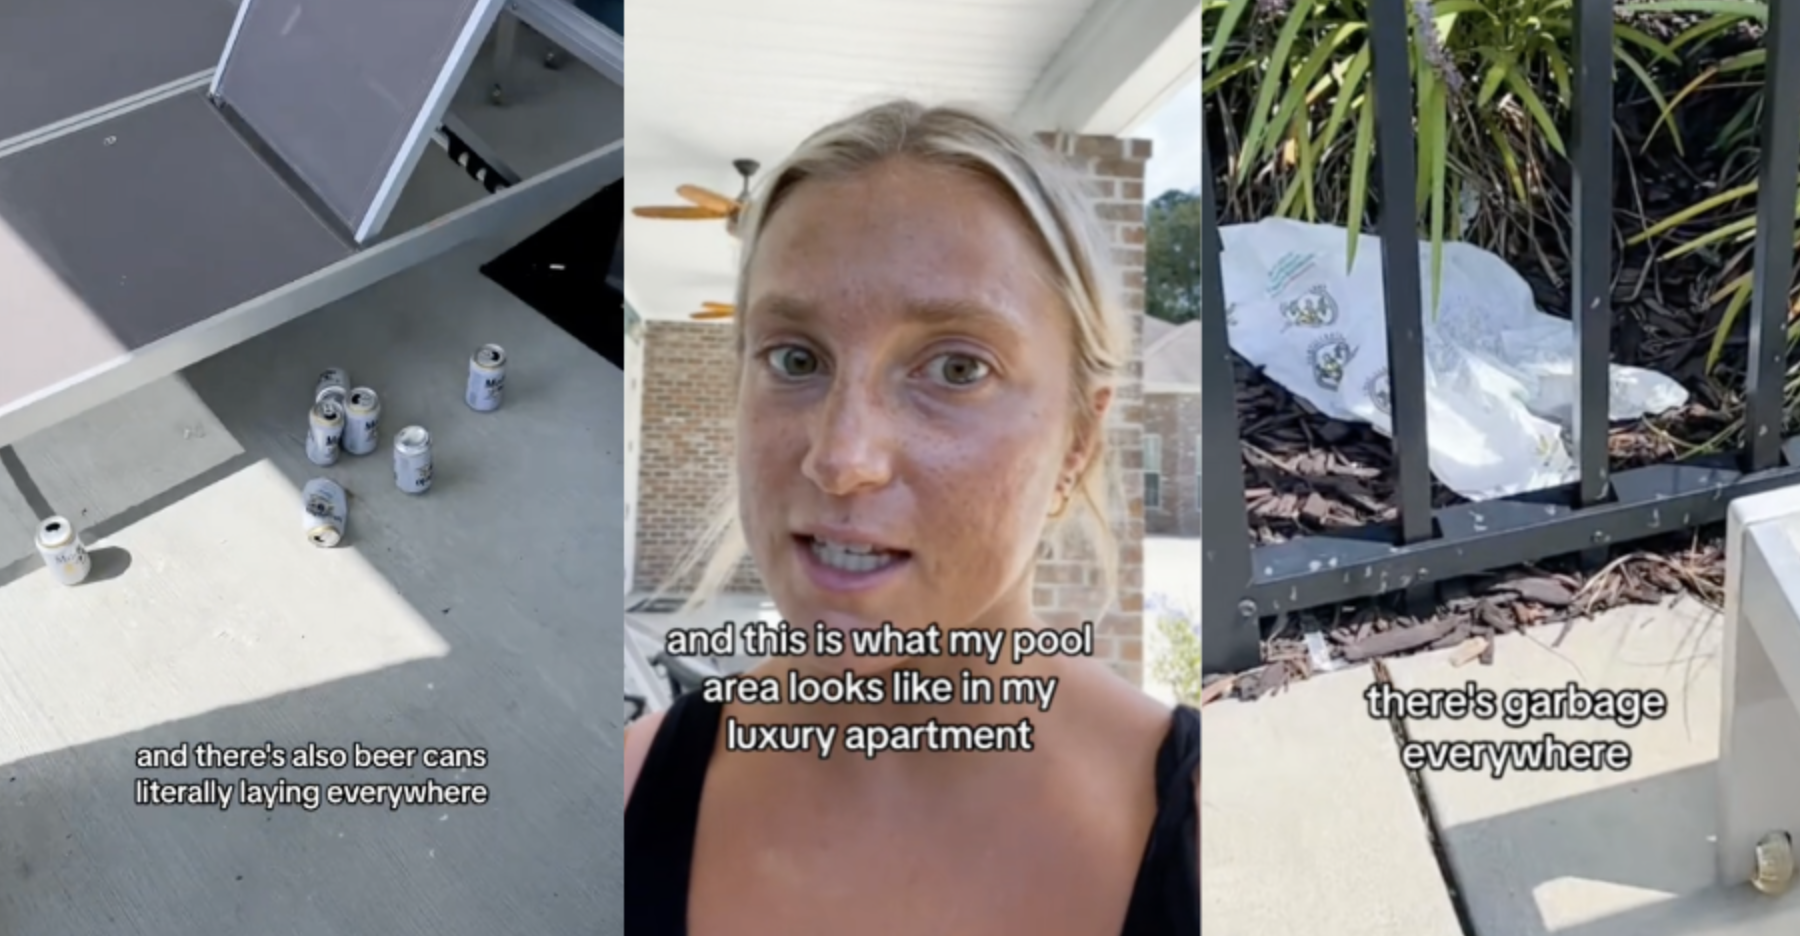 TikTok Bad Apartment Dirty Theres garbage everywhere. It’s gross to live like this. A Woman Showed Viewers The Bad Shape Her Luxury Apartment Complex Is In